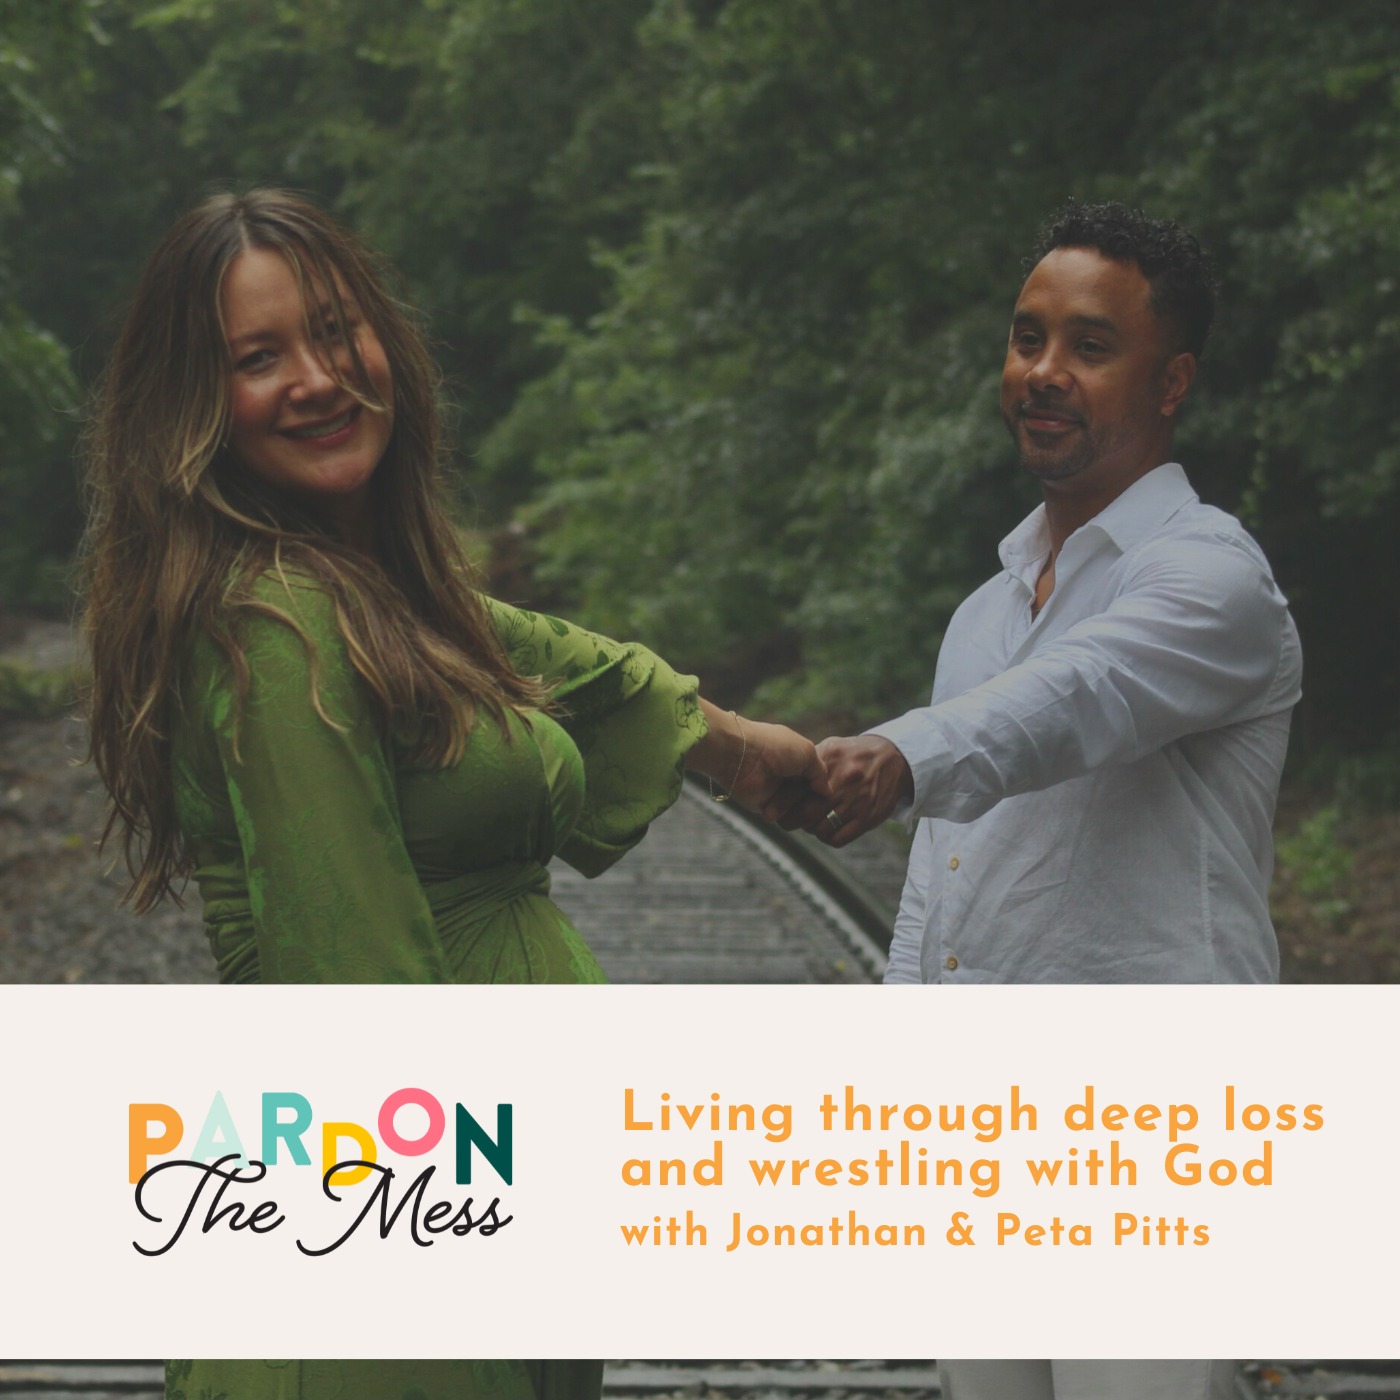 Living through deep loss and wrestling with God with Jonathan and Peta Pitts